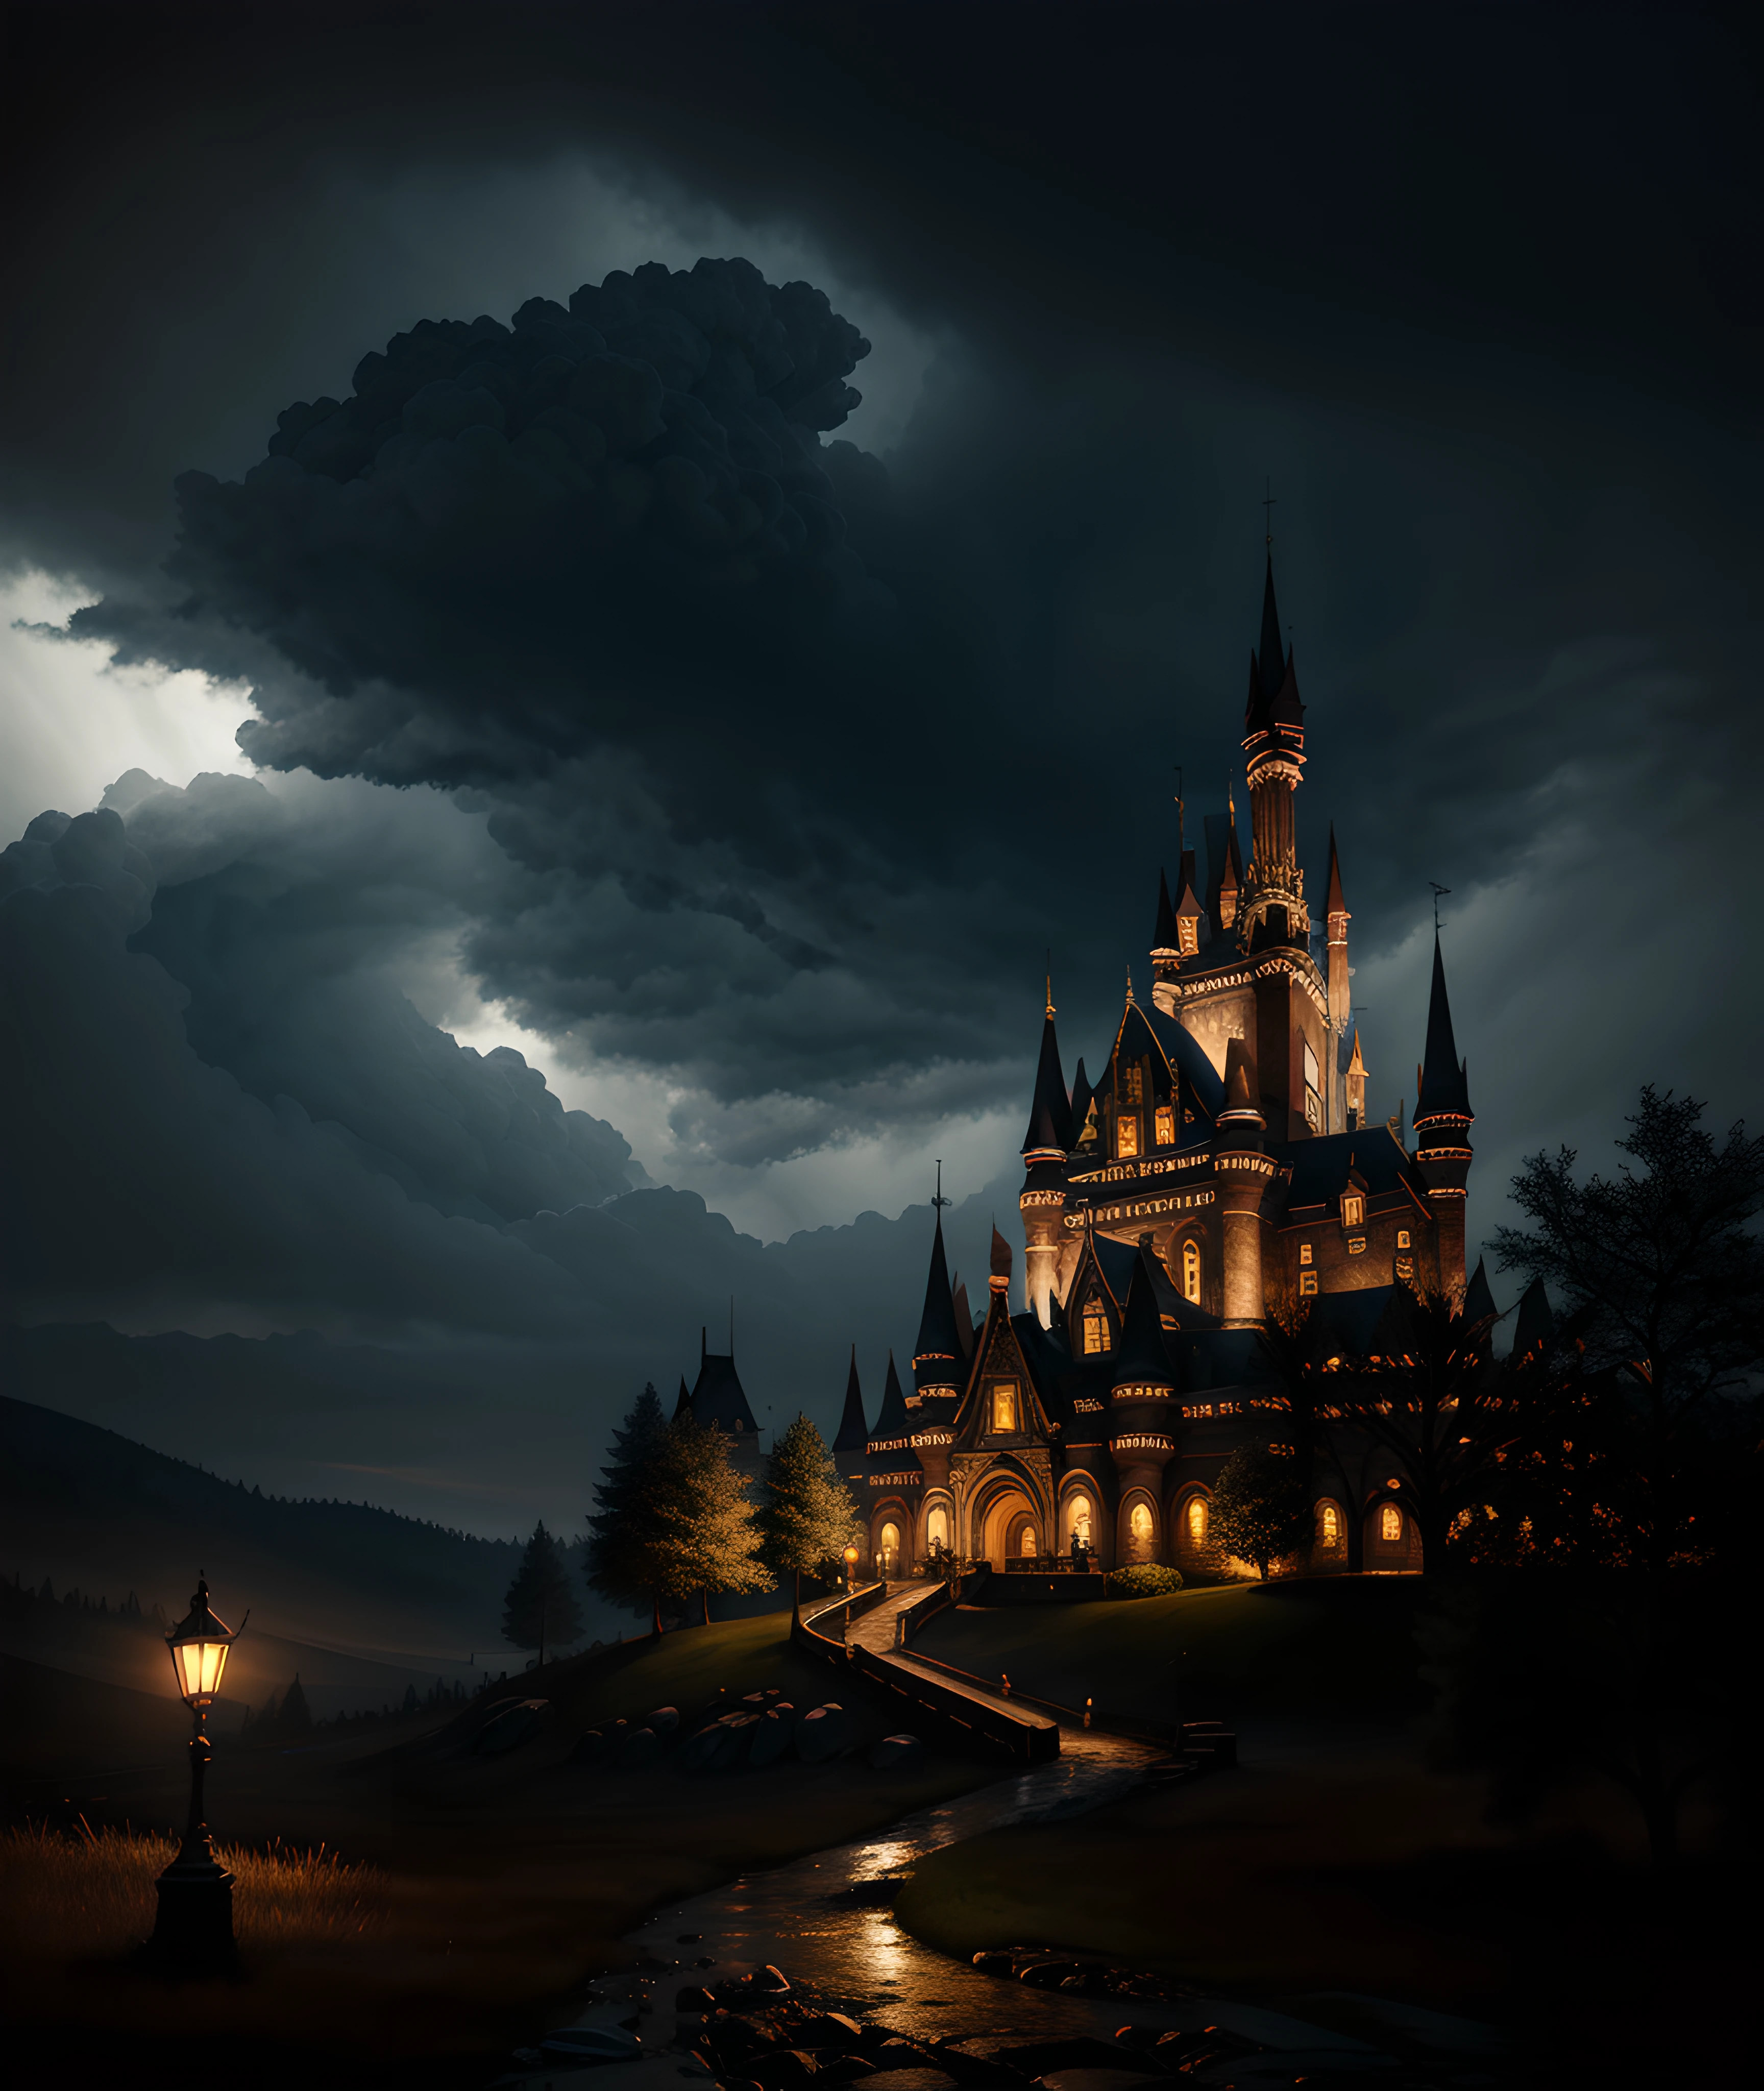 Masterpiece, extremely detailed, UHD 8k, octane render high detail, hyper-detail, create a castle dark and errie it's very presense in the world strikes fear that there is something ethereal even evil in the world that is unexplainable, there is candlelight projecting an evil light, ominous, moonlight, mist, forest surrounding, award winning photography, Photorealistic, volumetric lightning, subdued colors, darkness, dramatic lighting